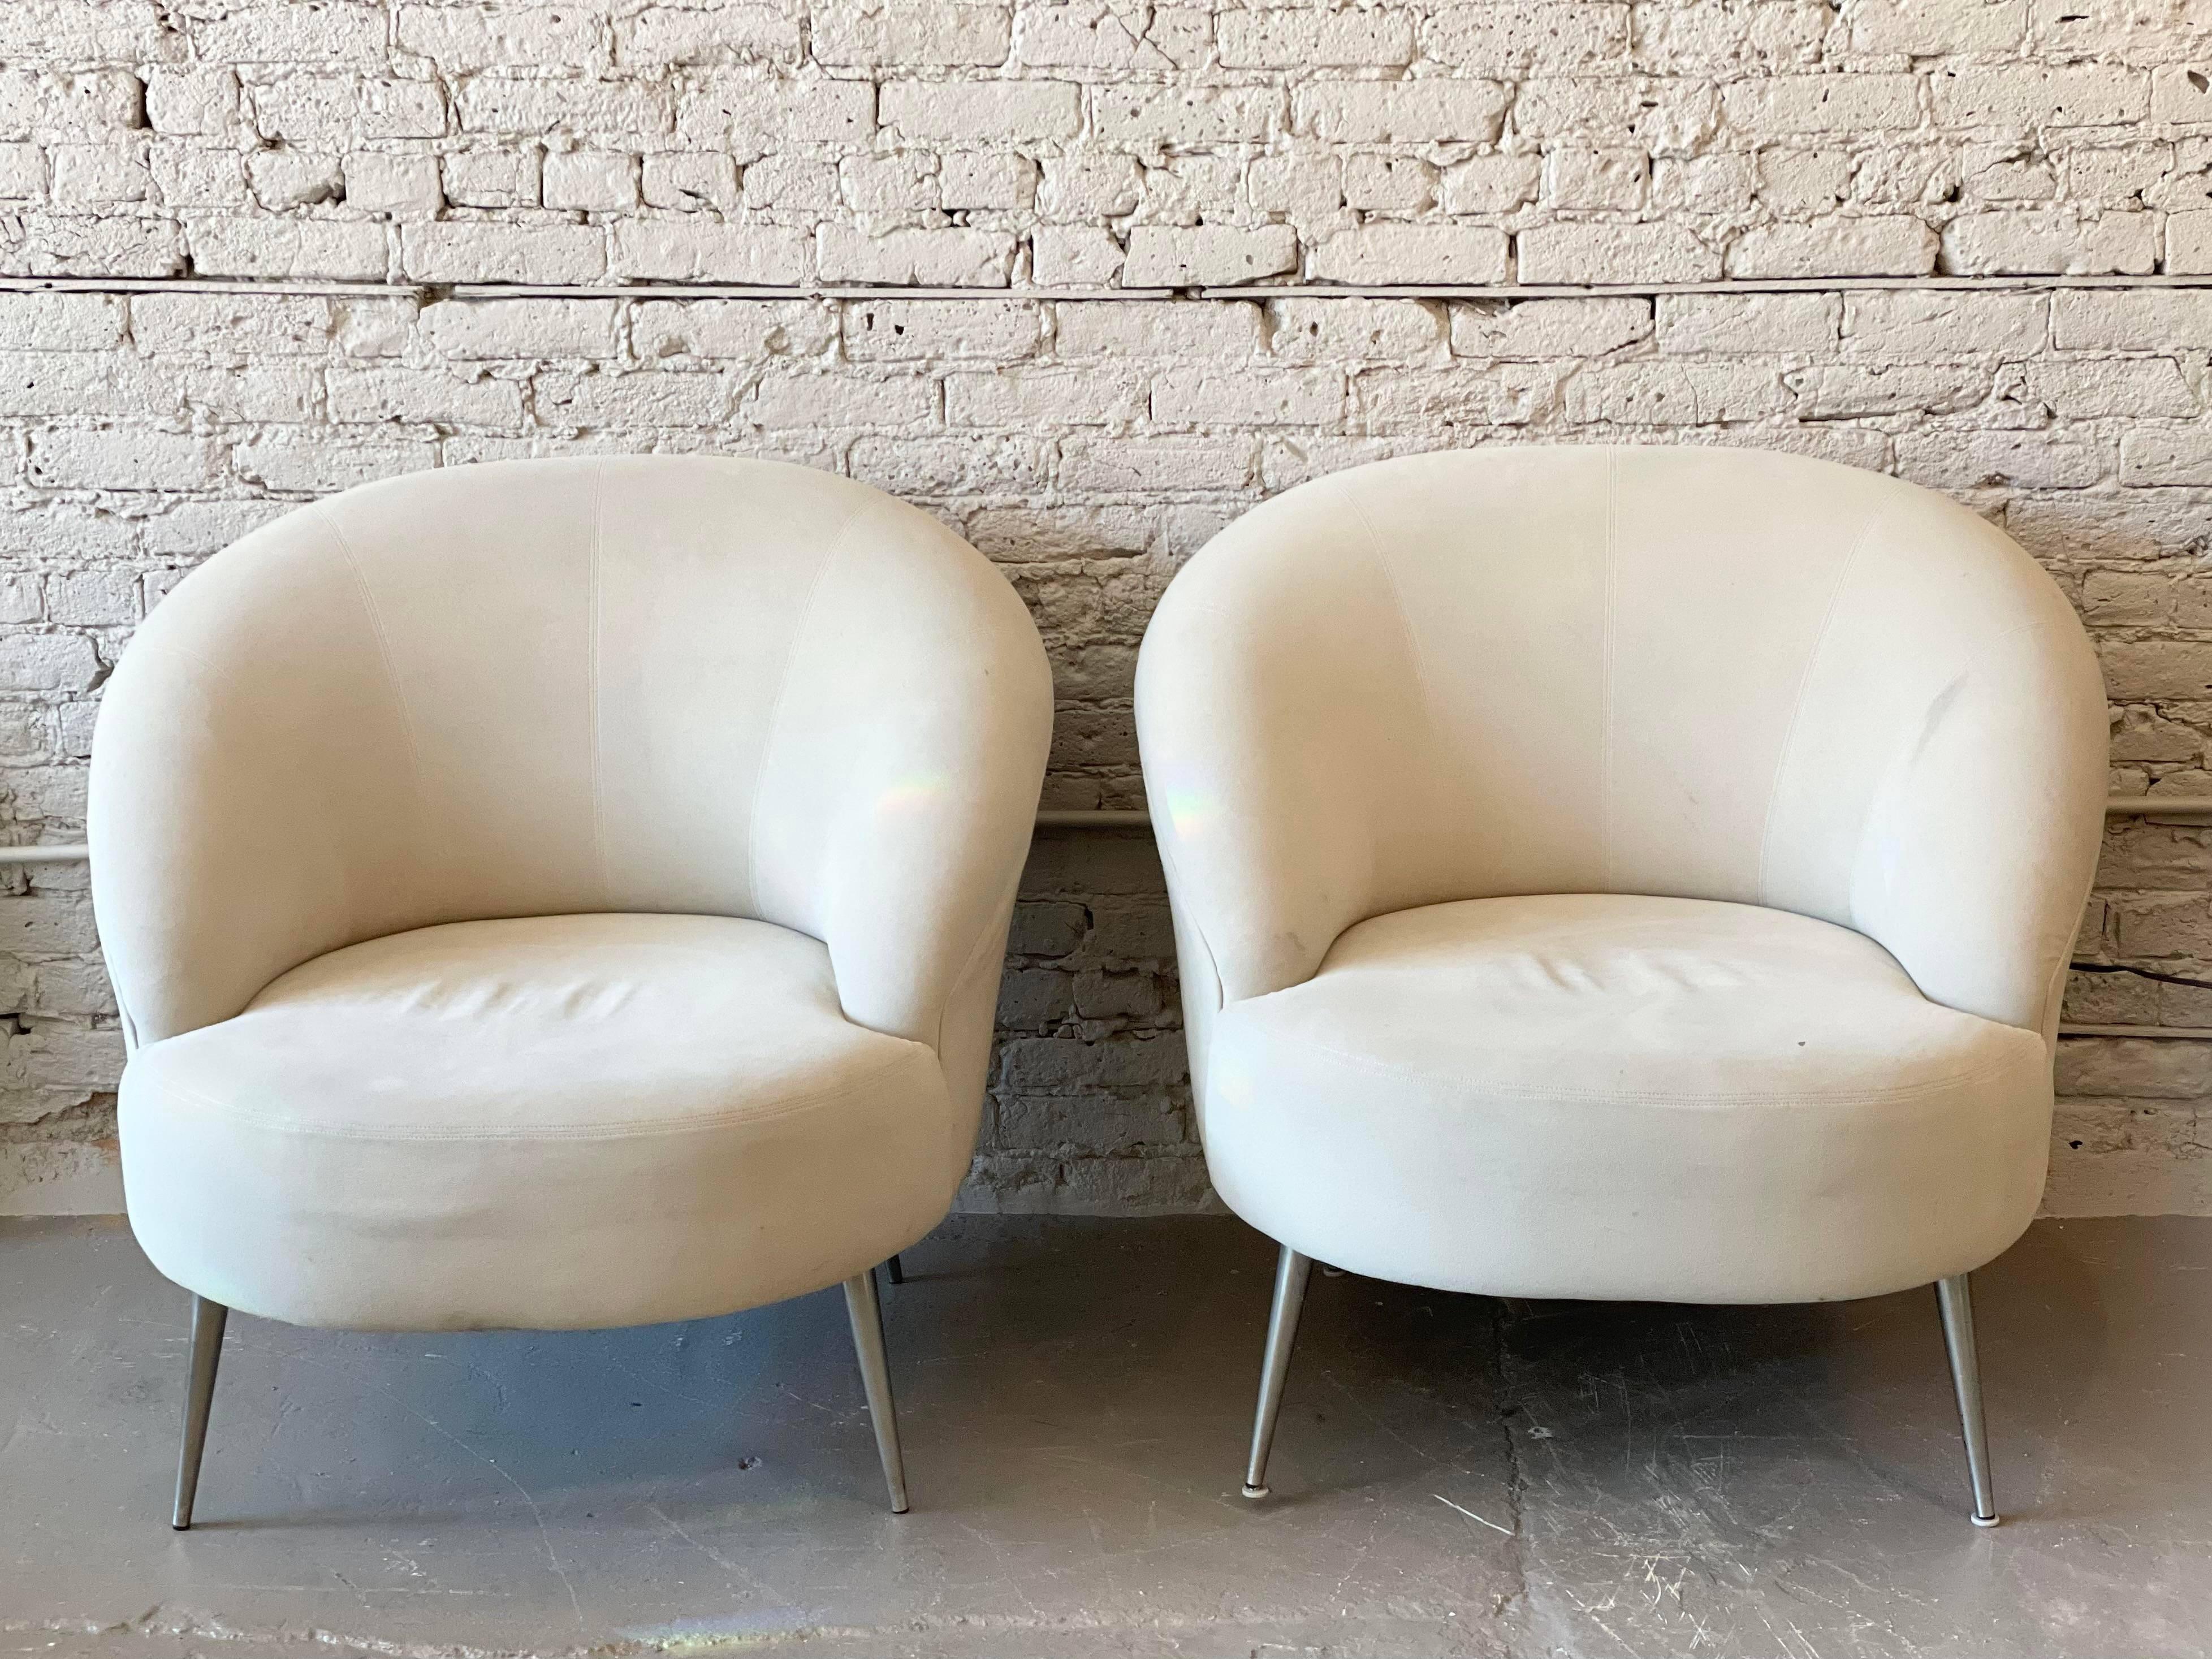 American Oversized Postmodern Directional Lounge Chairs, a Pair For Sale